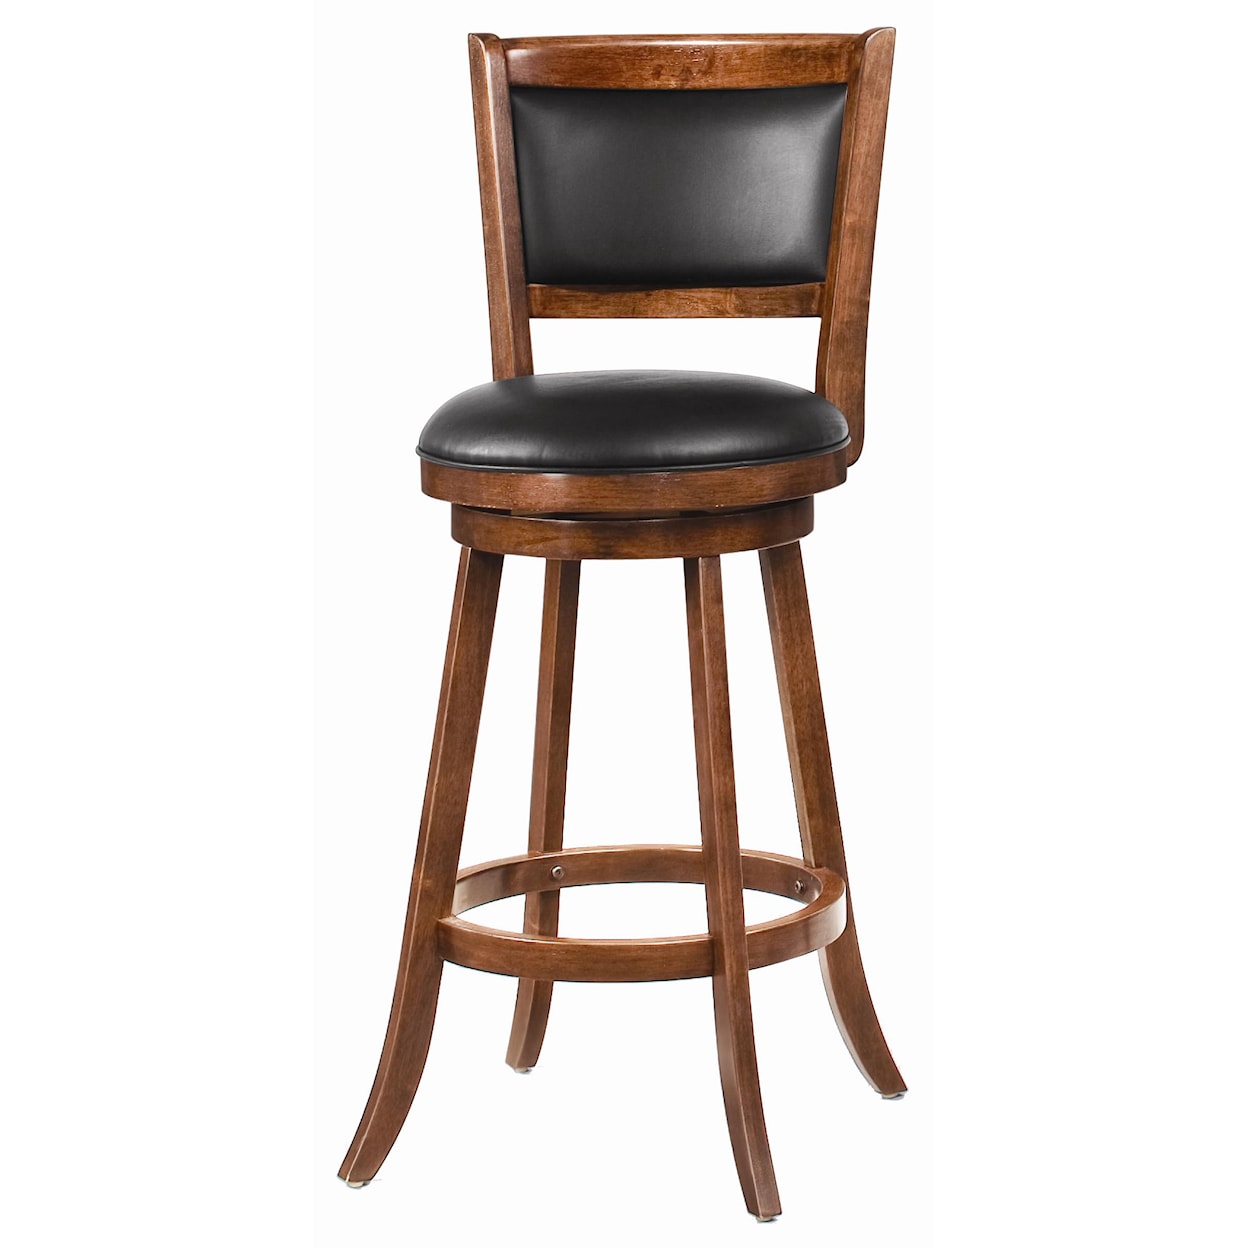 Michael Alan CSR Select Dining Chairs and Bar Stools 29" Swivel Bar Stool with Upholstered Seat